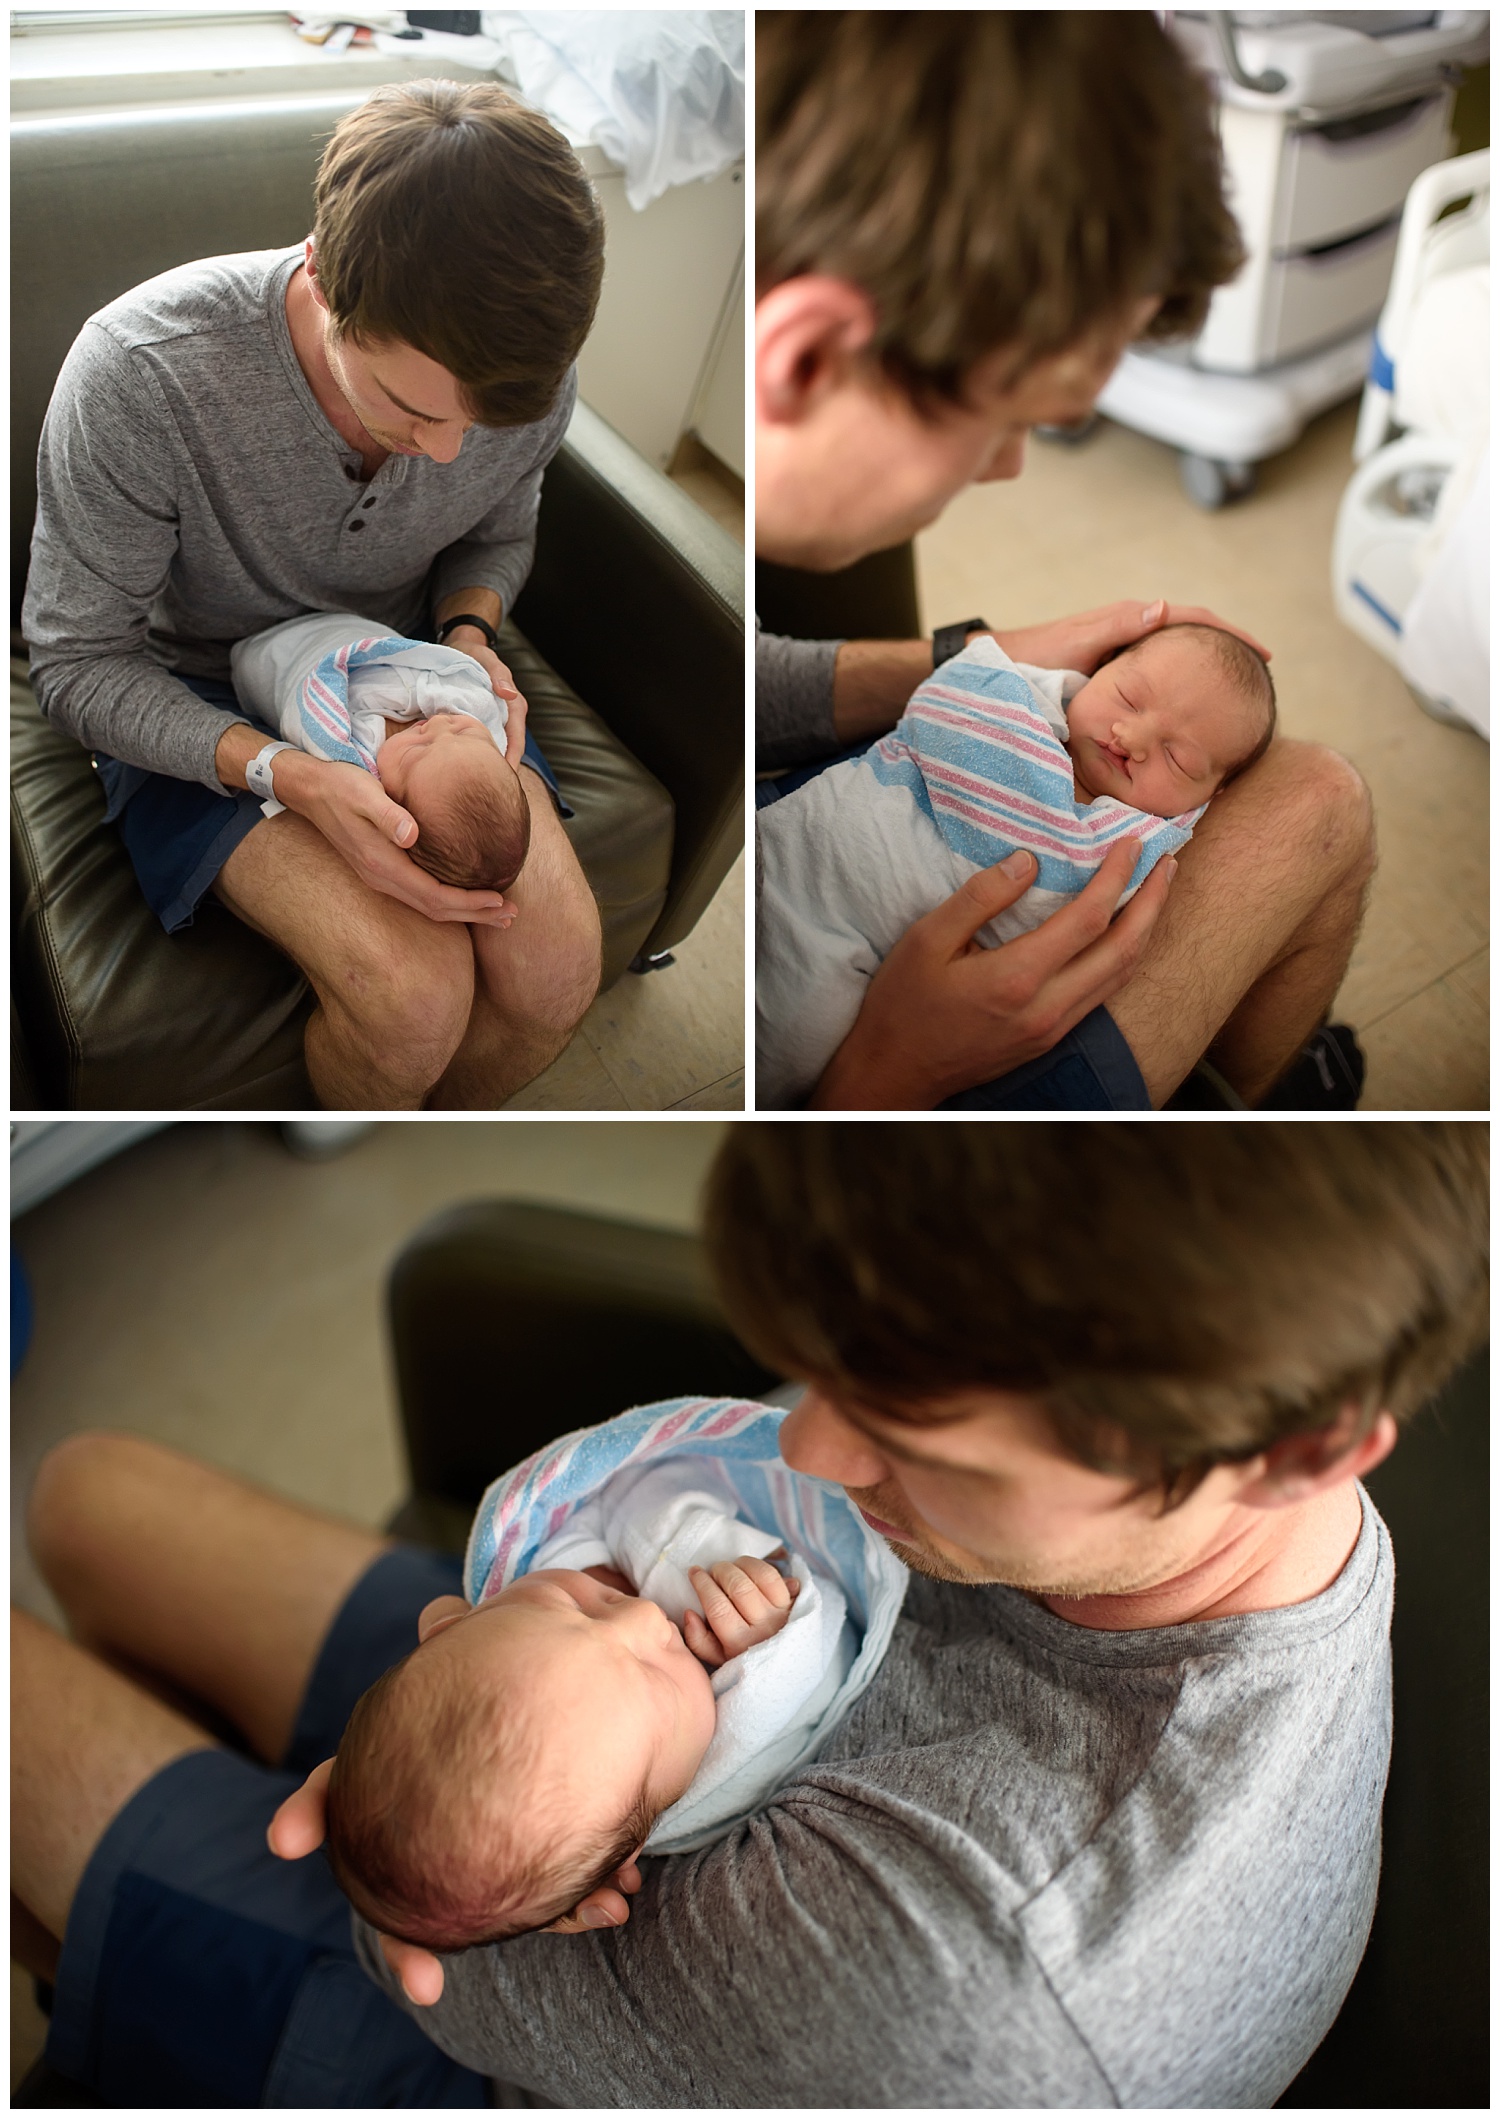 these are images of a father holding his newborn baby girl on his lap and close to his chest. the images were taken at piedmont hospital in atlanta georgia